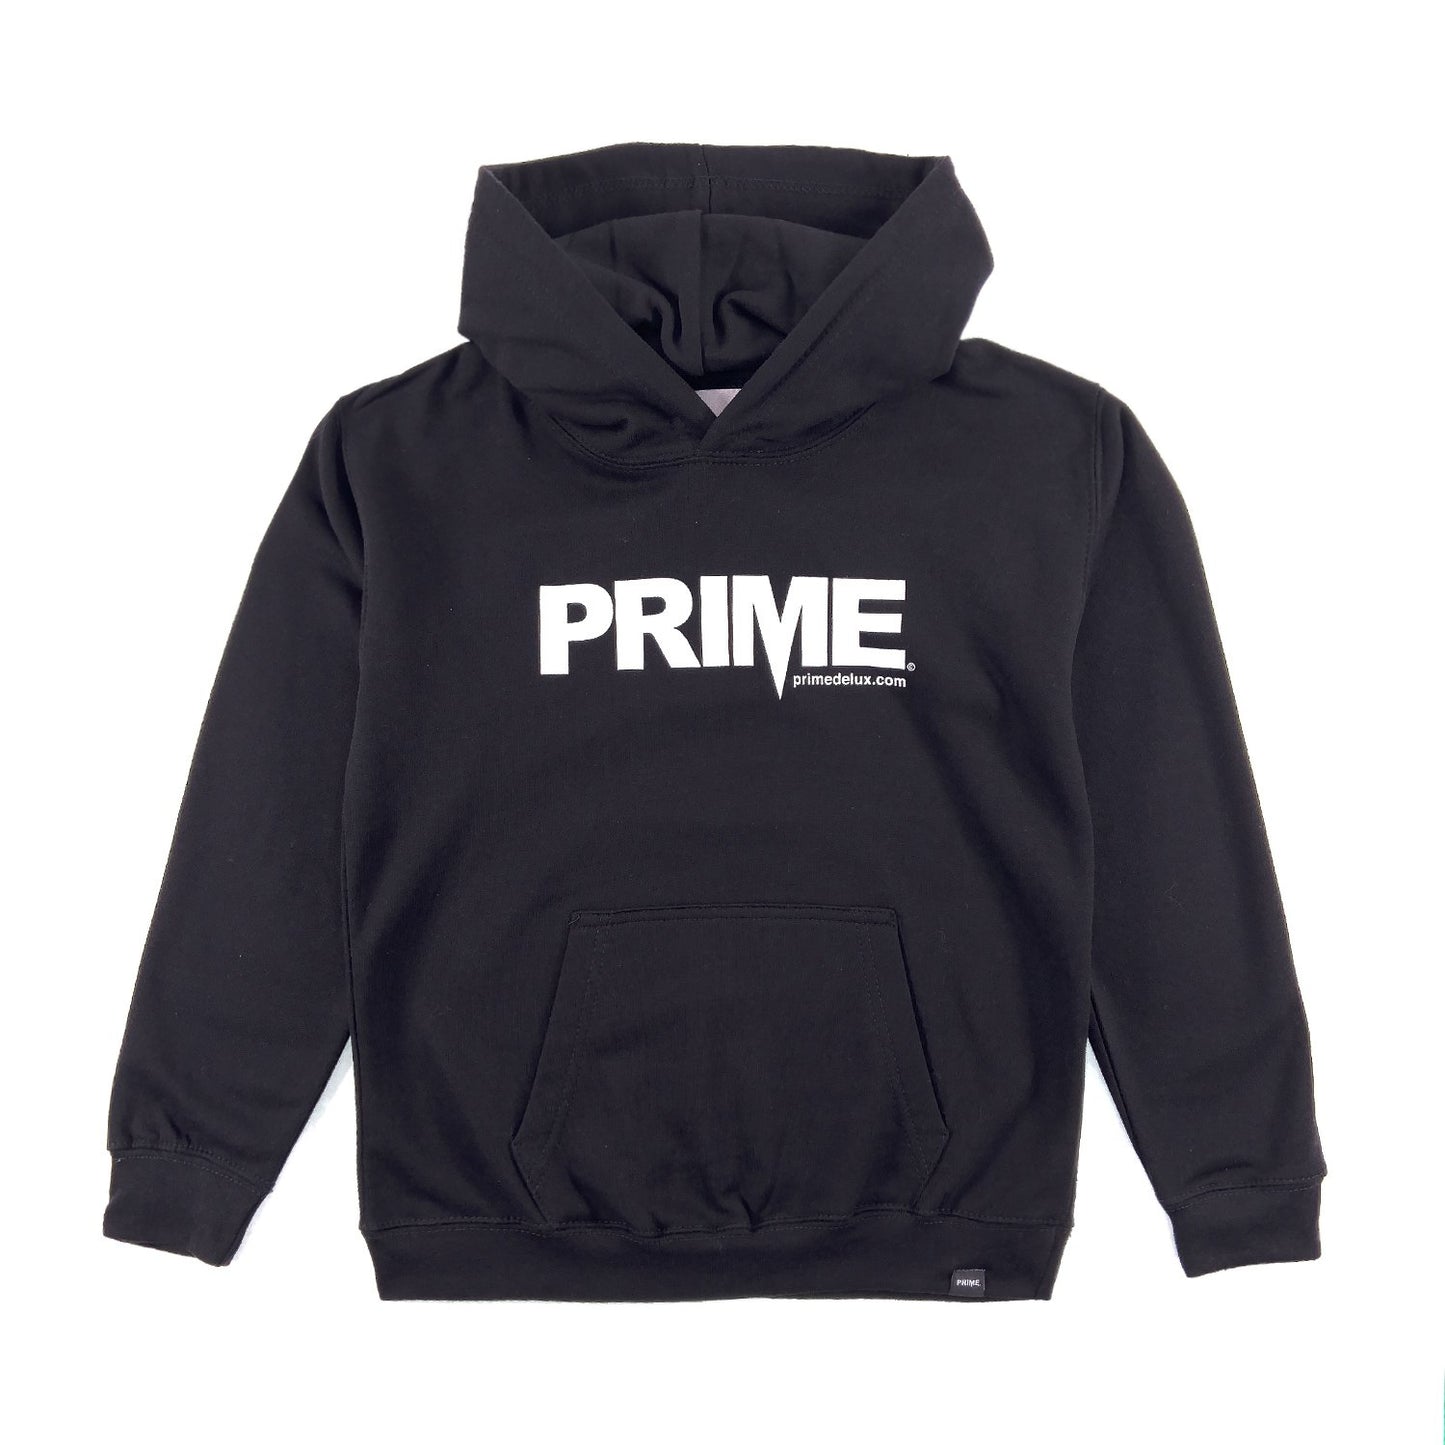 PRIME DELUX YOUTHS OG PREMIUM HOODED SWEAT - DEEP BLACK / WHITE - Prime Delux Store